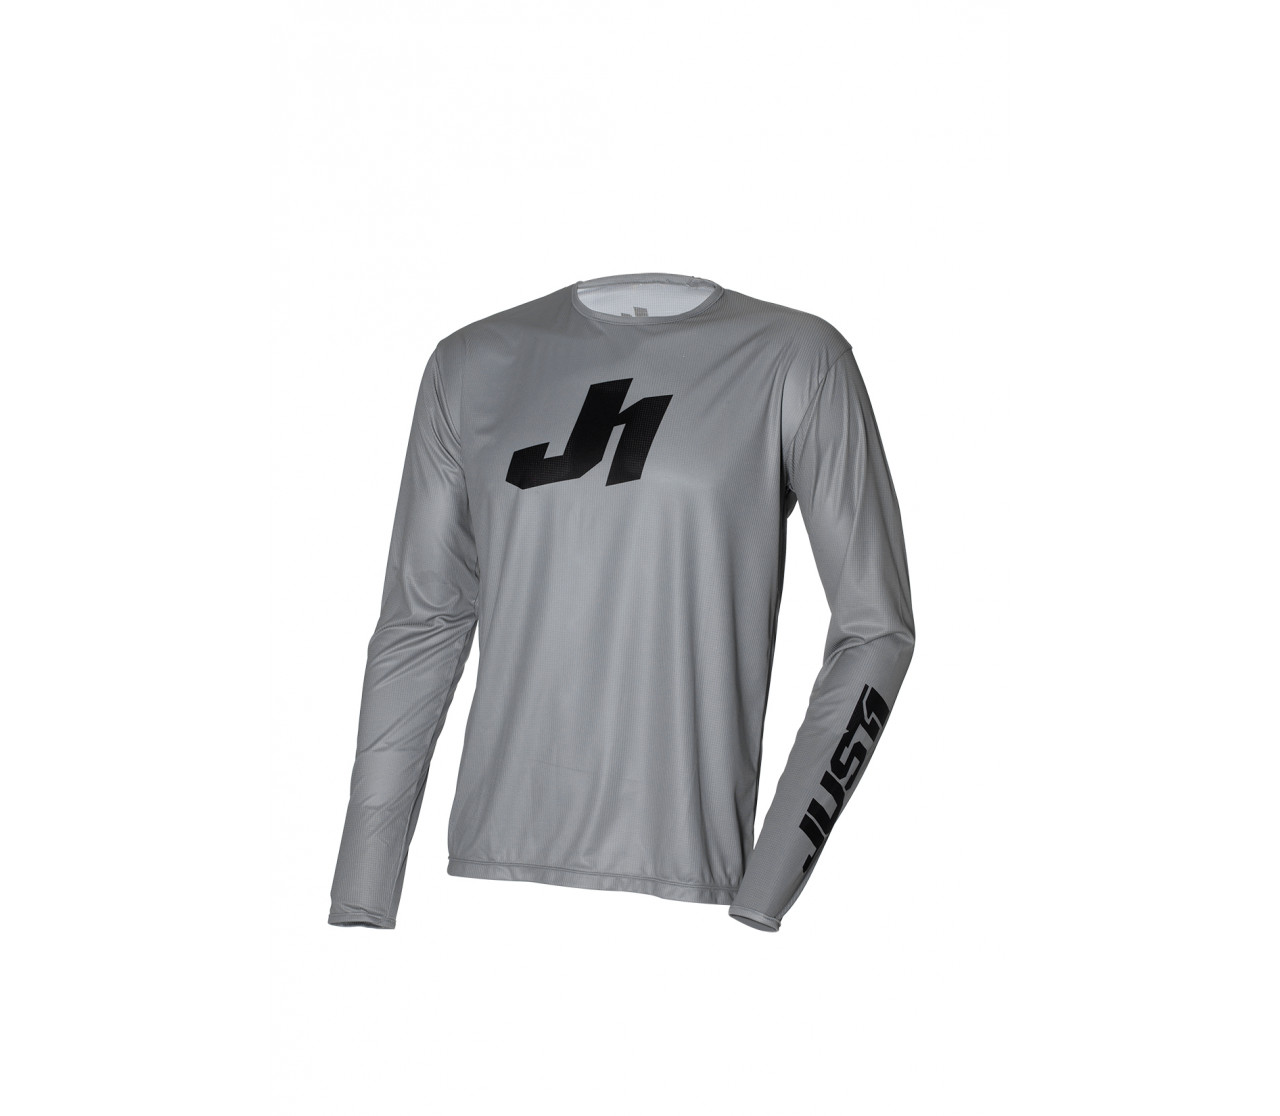 JUST1 JERSEY J-ESSENTIAL YOUTH SOLID GREY BLACK